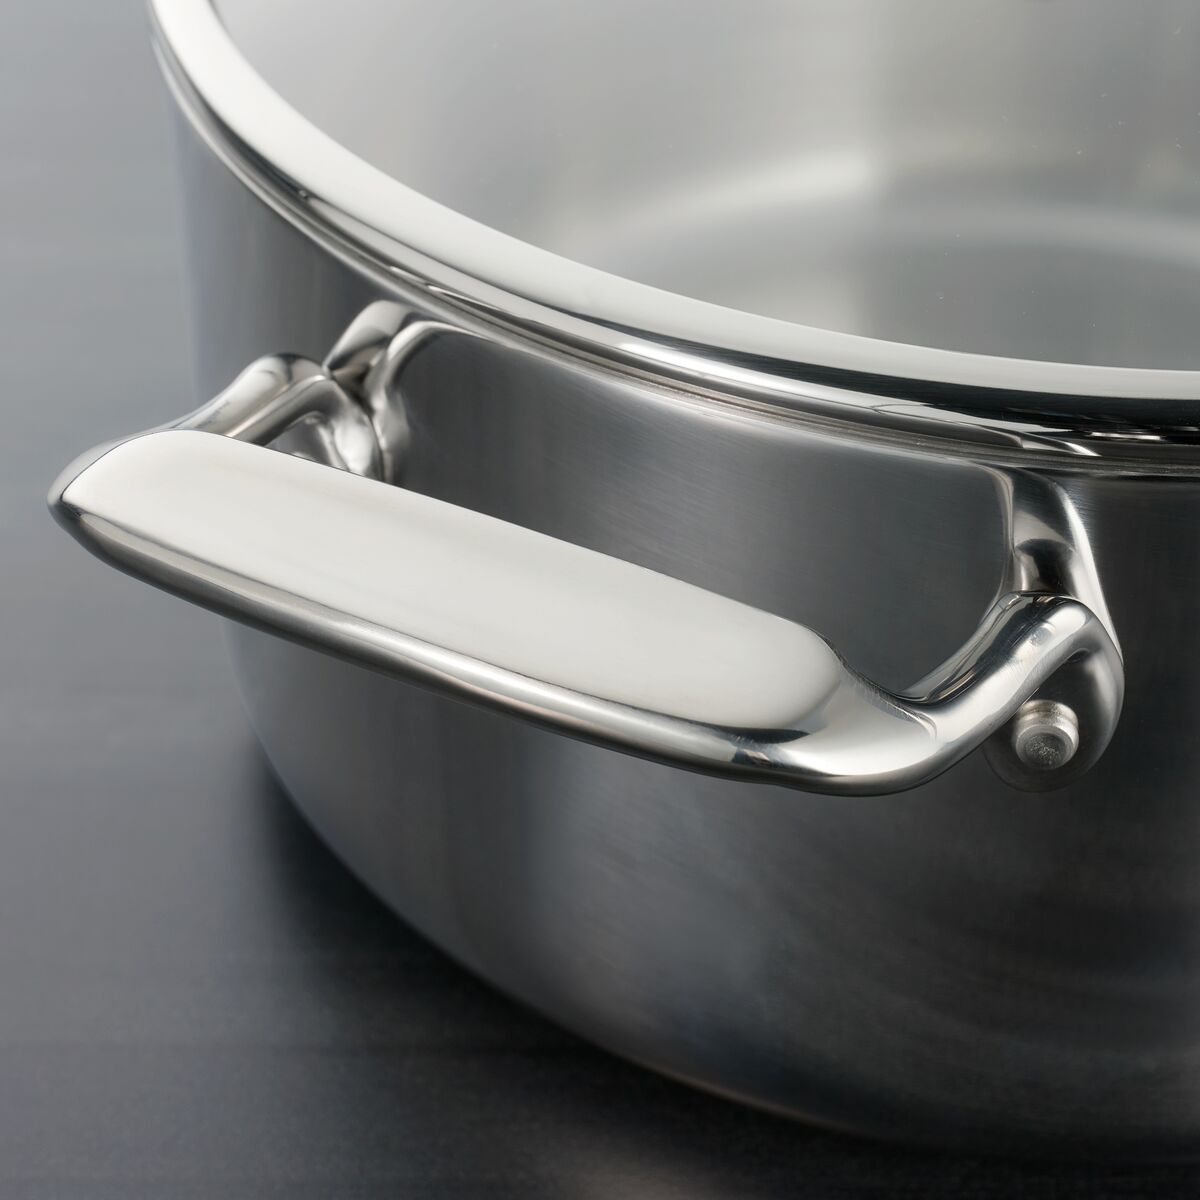 Fracoda 4 Quart Saucepan with Strainer Glass Lid, Stainless Steel